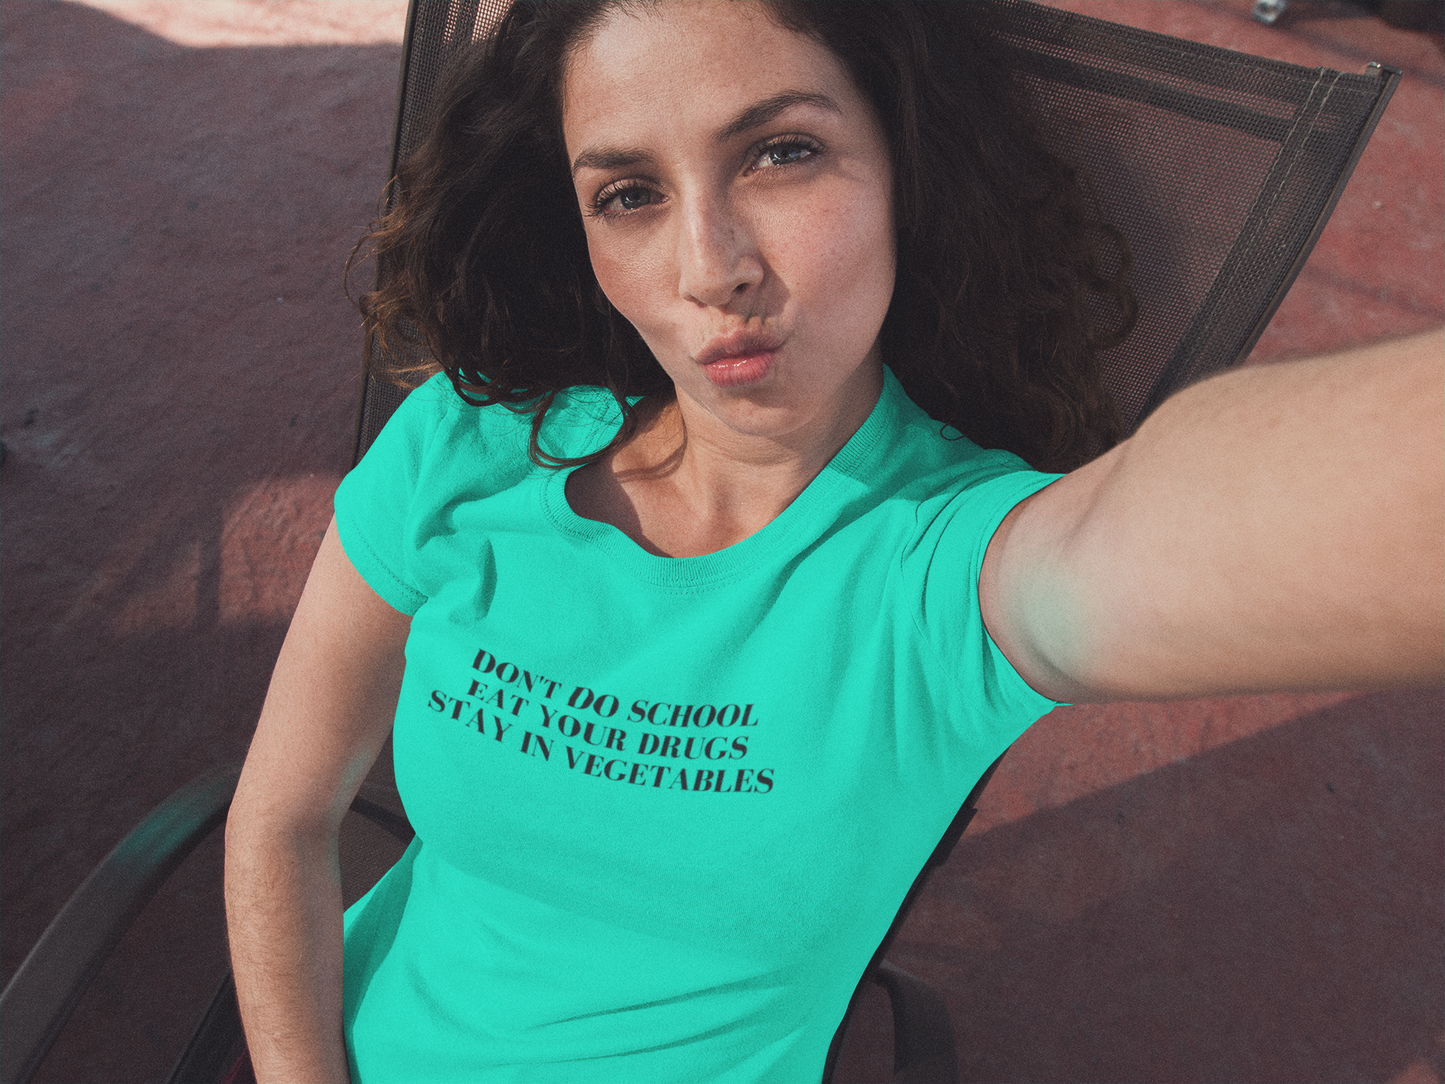 Women's Don't Do School, Eat Your Drugs, Stay In Vegetables Mint Green T-Shirt